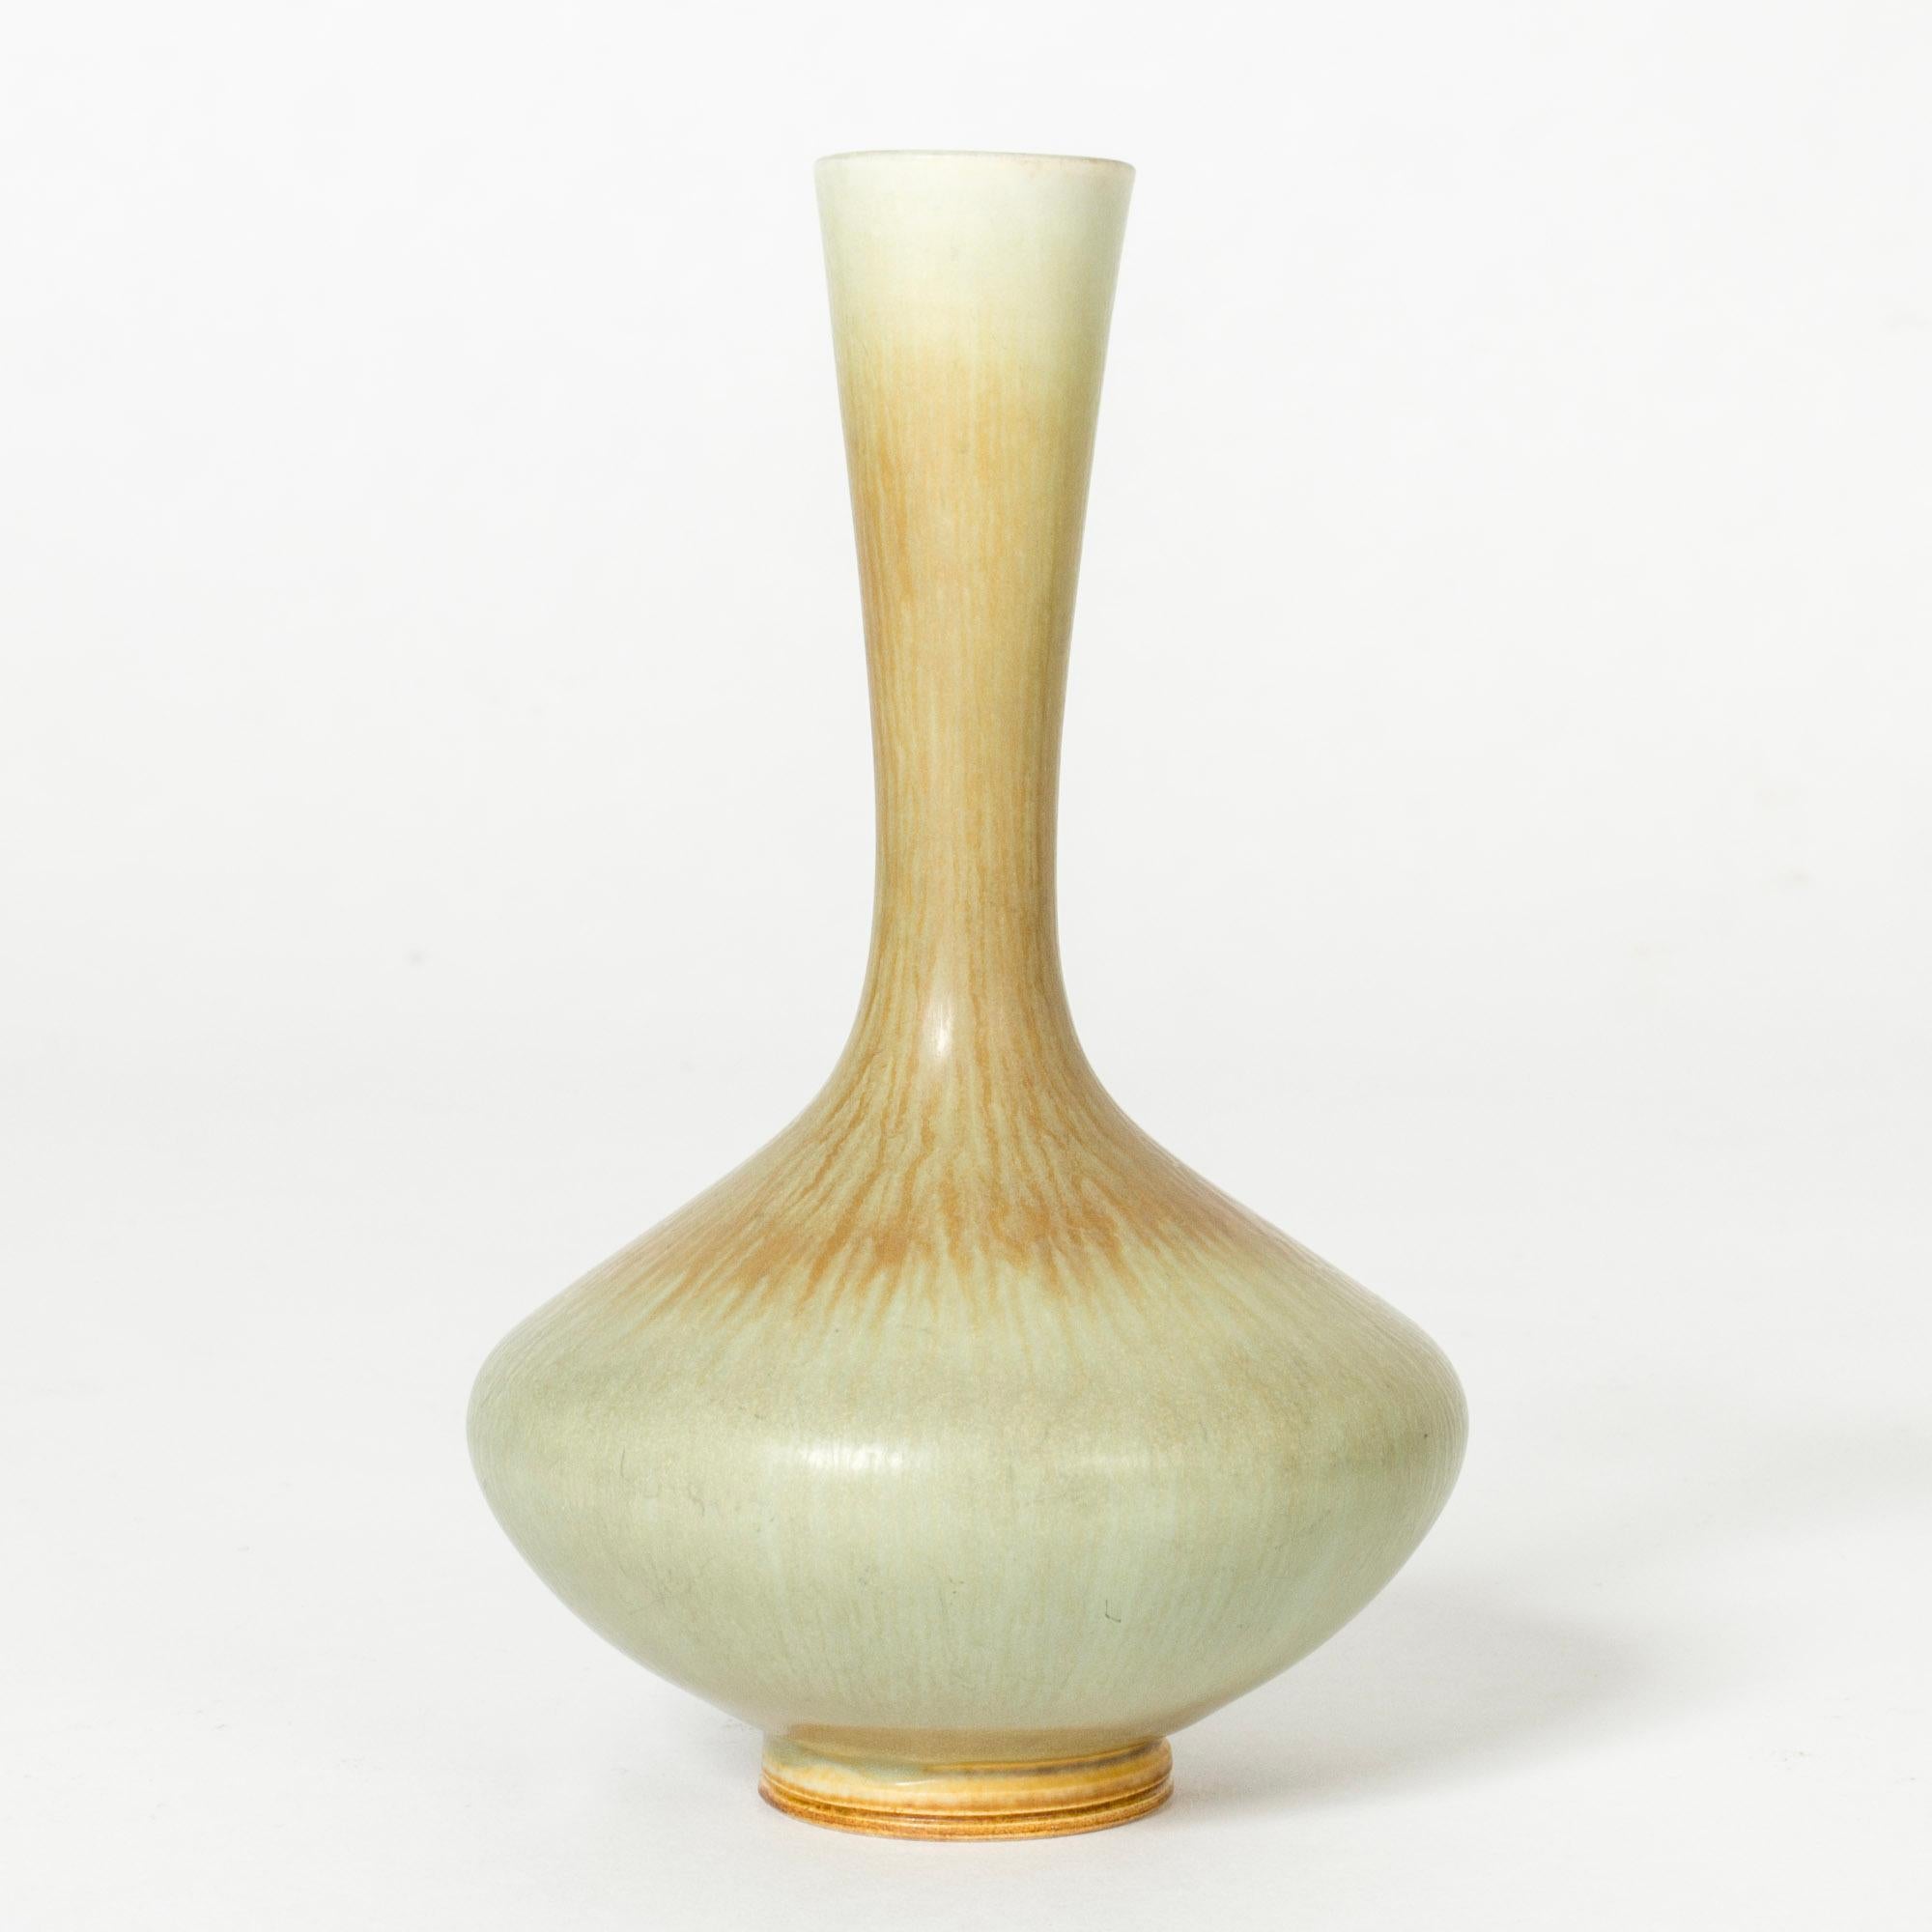 Lovely stoneware vase by Berndt Friberg, with a slender neck and plump base. Glazed pale celadon green with warm brown streaks.

Berndt Friberg was a Swedish ceramicist, renowned for his stoneware vases and vessels for Gustavsberg. His pure,